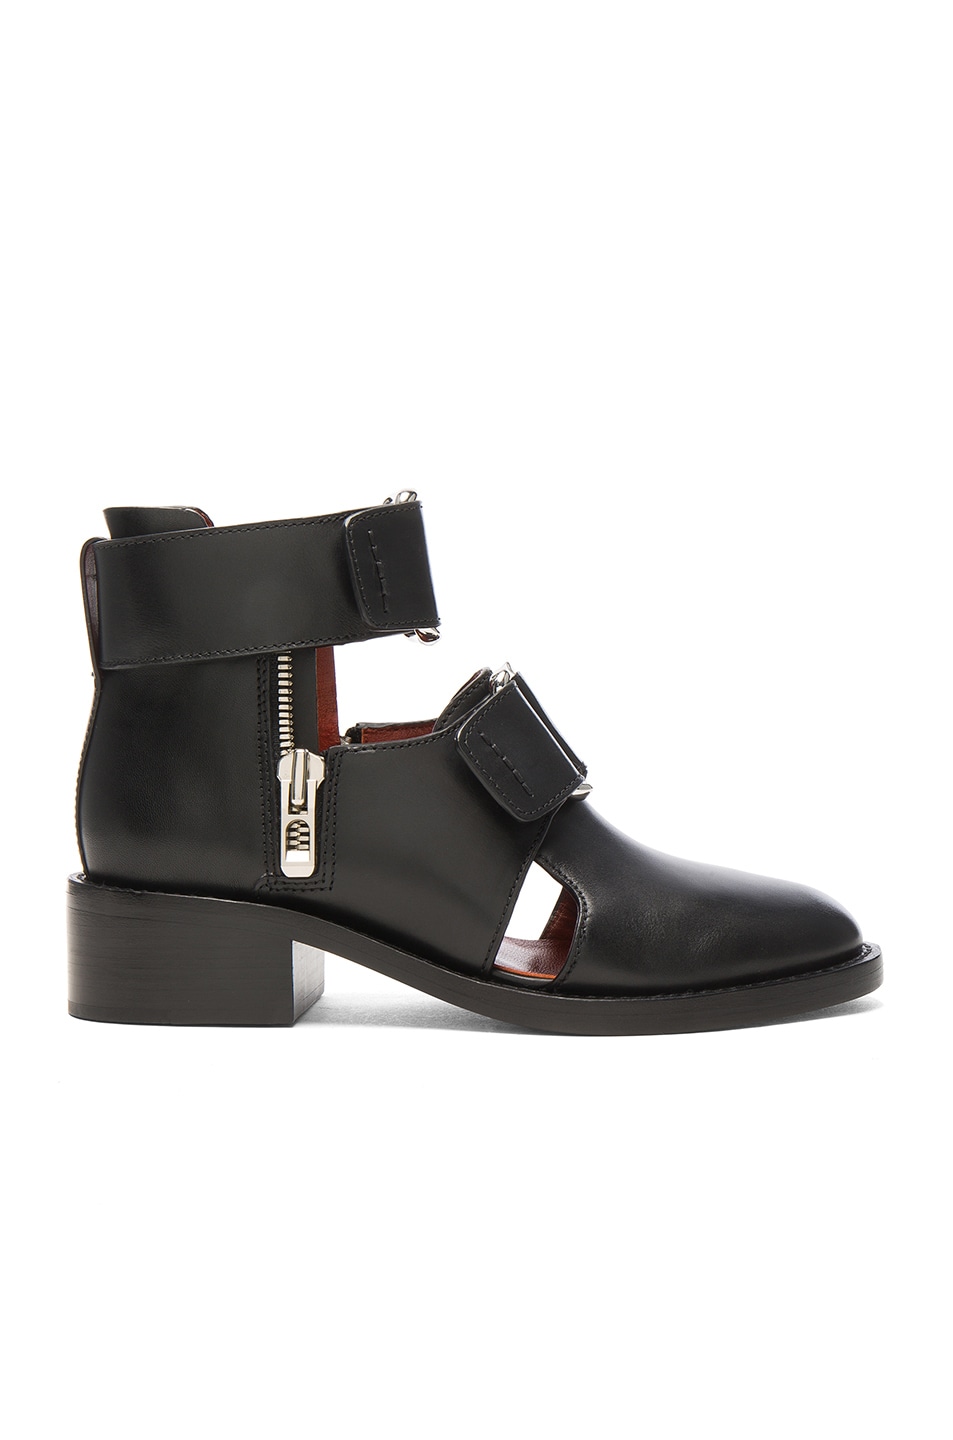 Image 1 of 3.1 phillip lim Leather Addis Cut Out Boots in Black